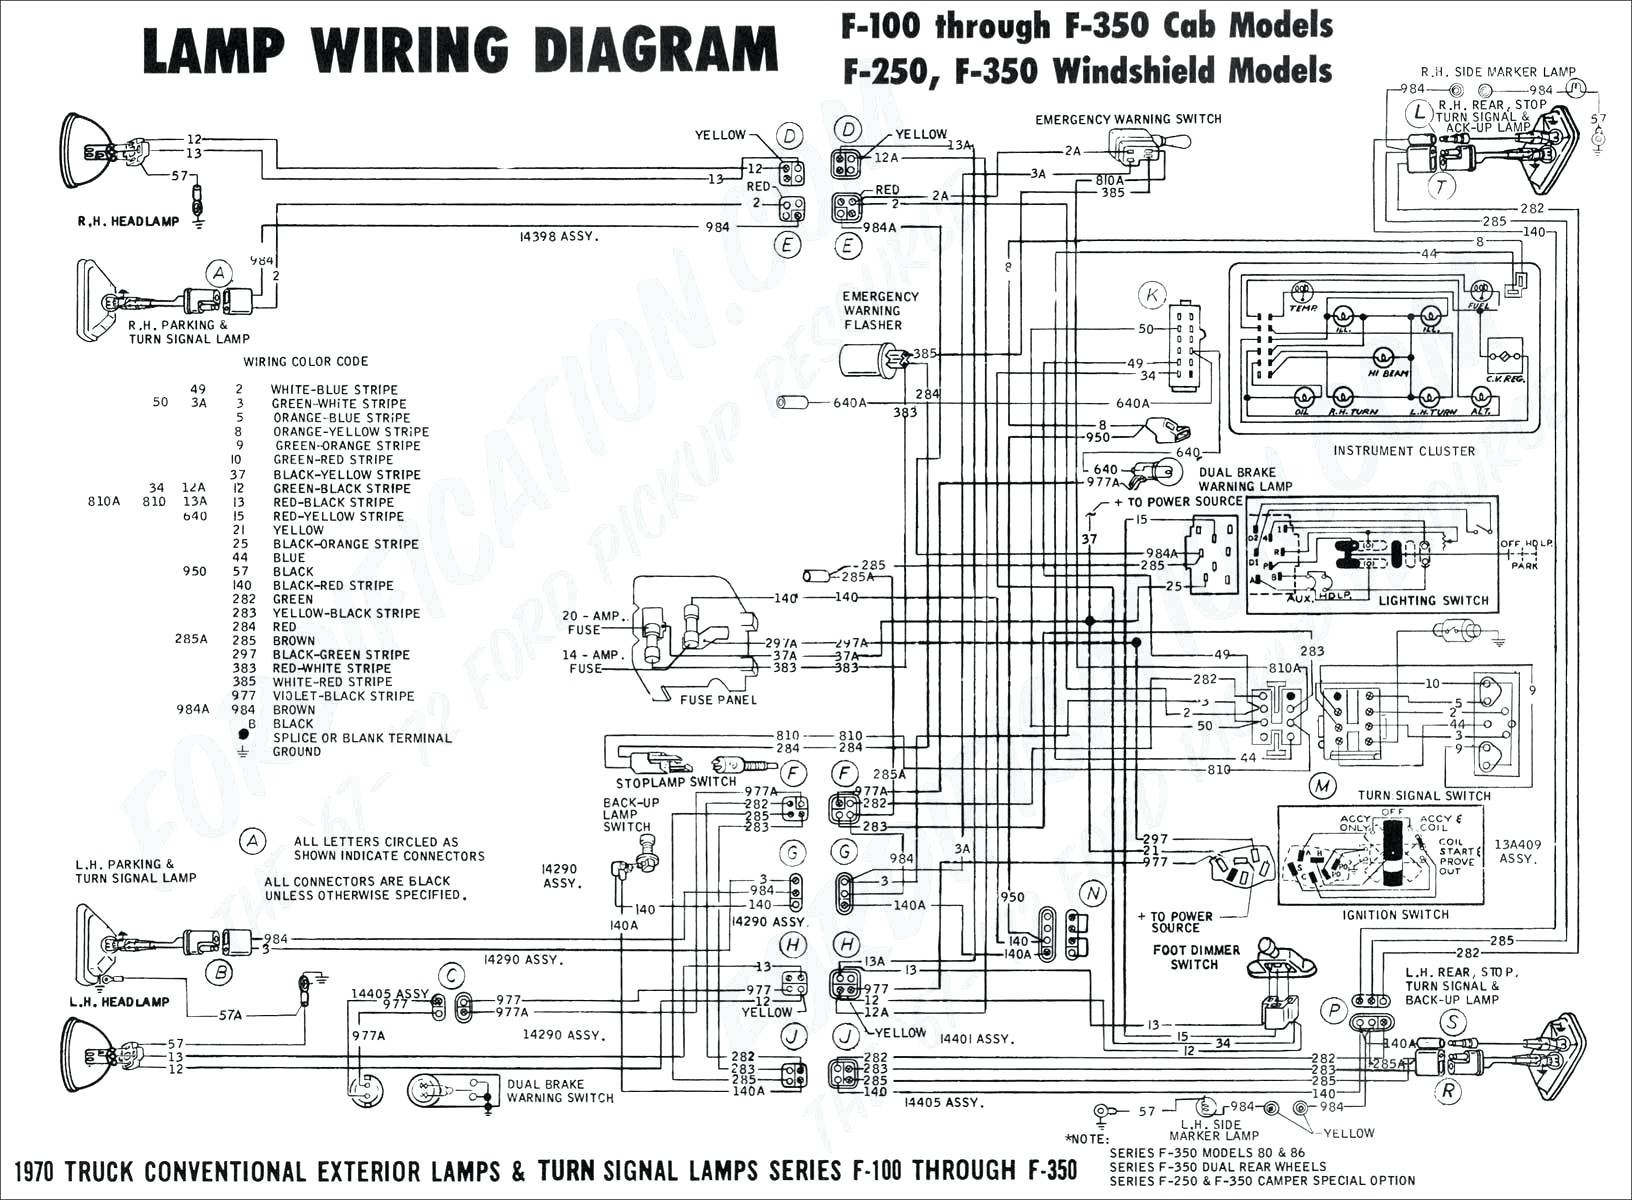 2000 Ford Mustang Stereo Wiring Diagram Unique 2000 Ford Mustang Stereo Wiring Diagram Autos Weblog Wire Center